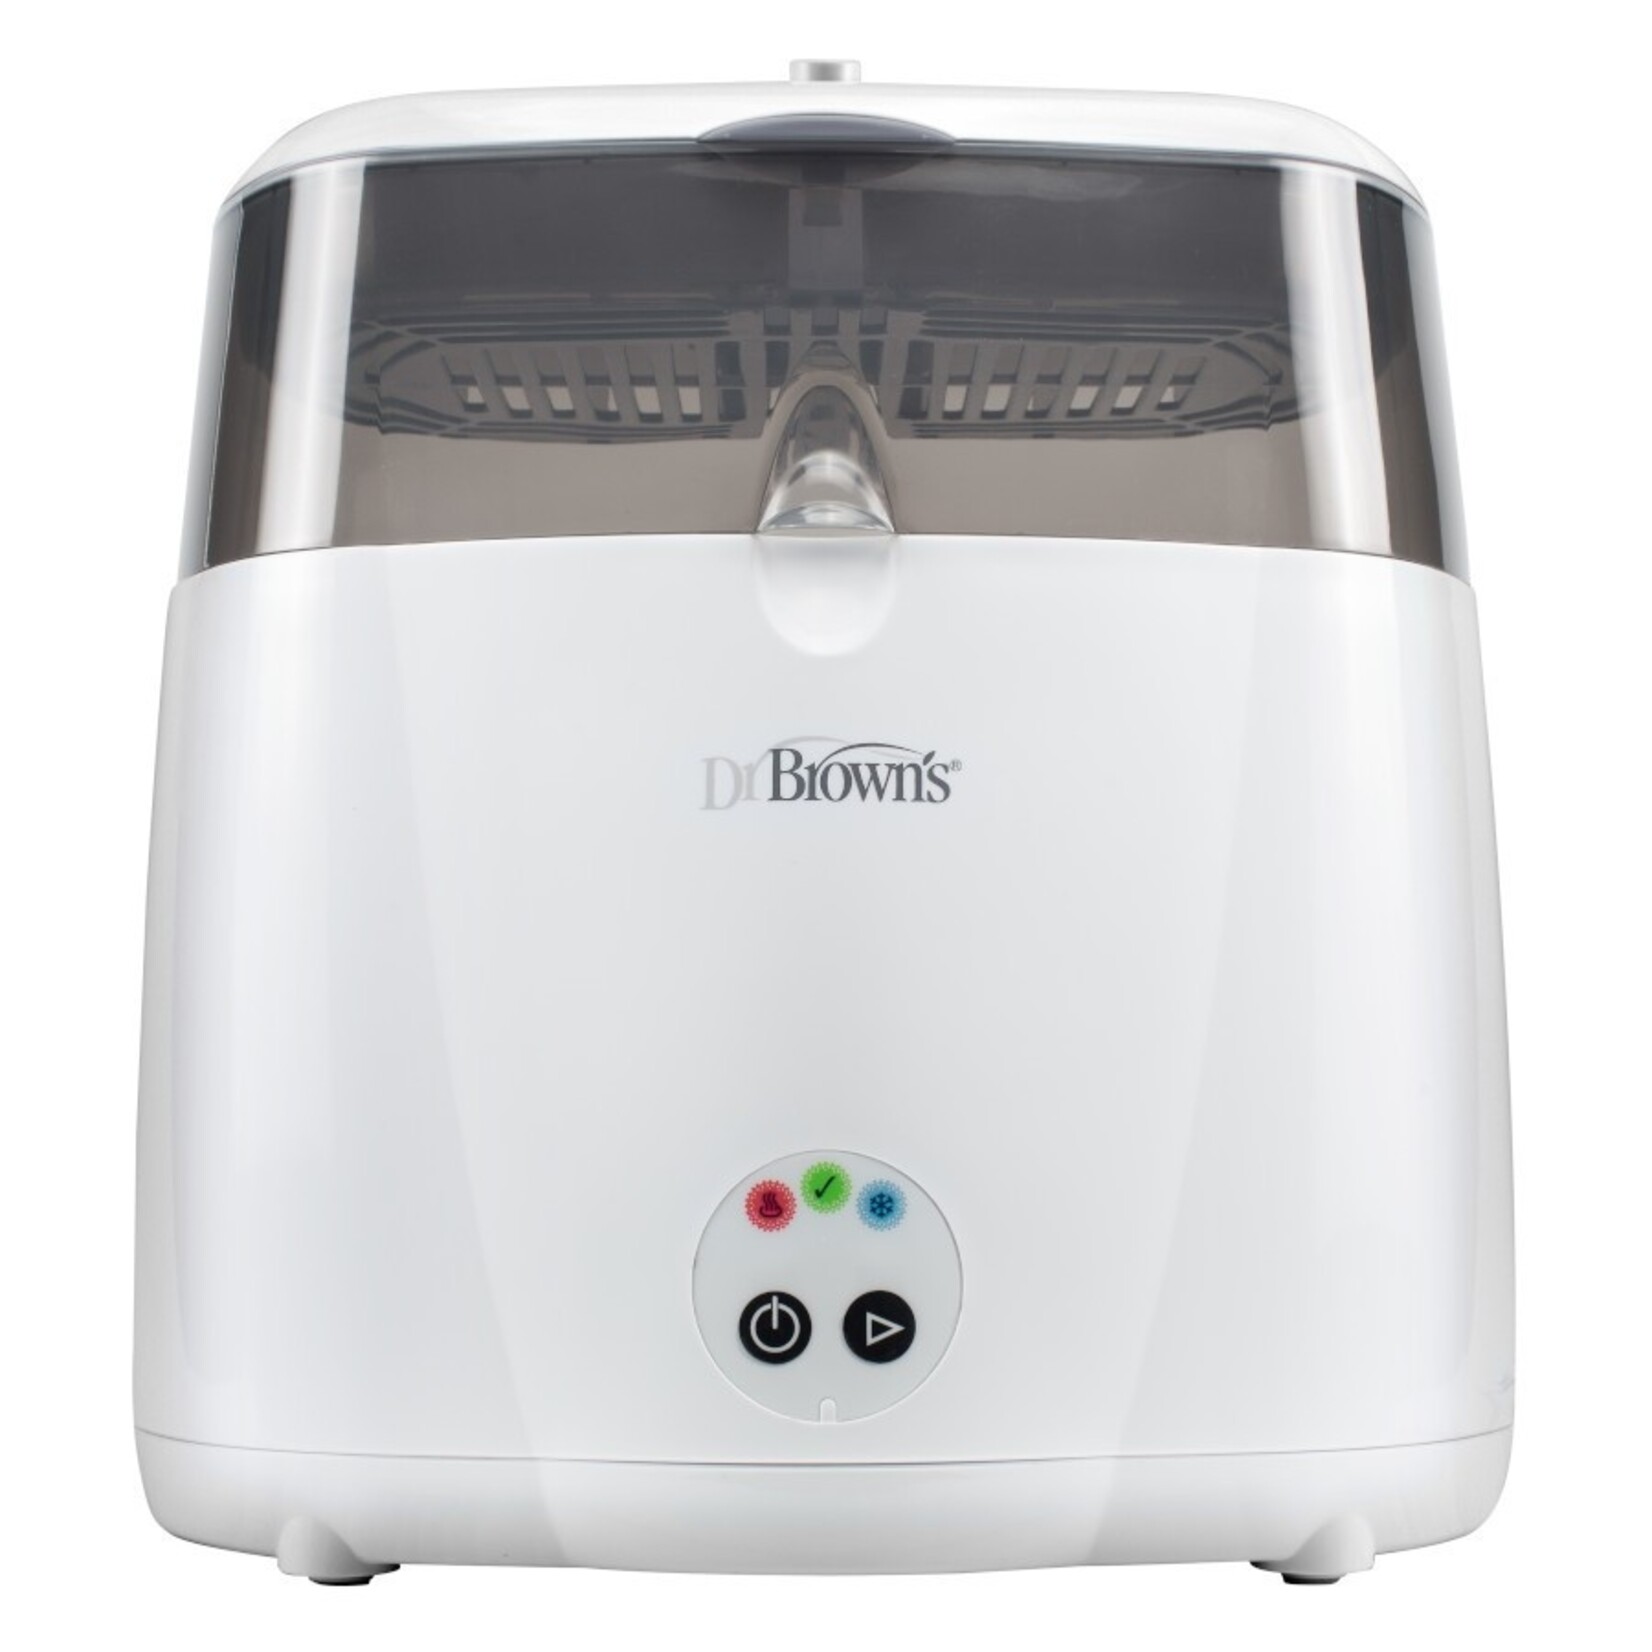 Dr Browns DR BROWNS DELUXE STERILIZER WITH LED